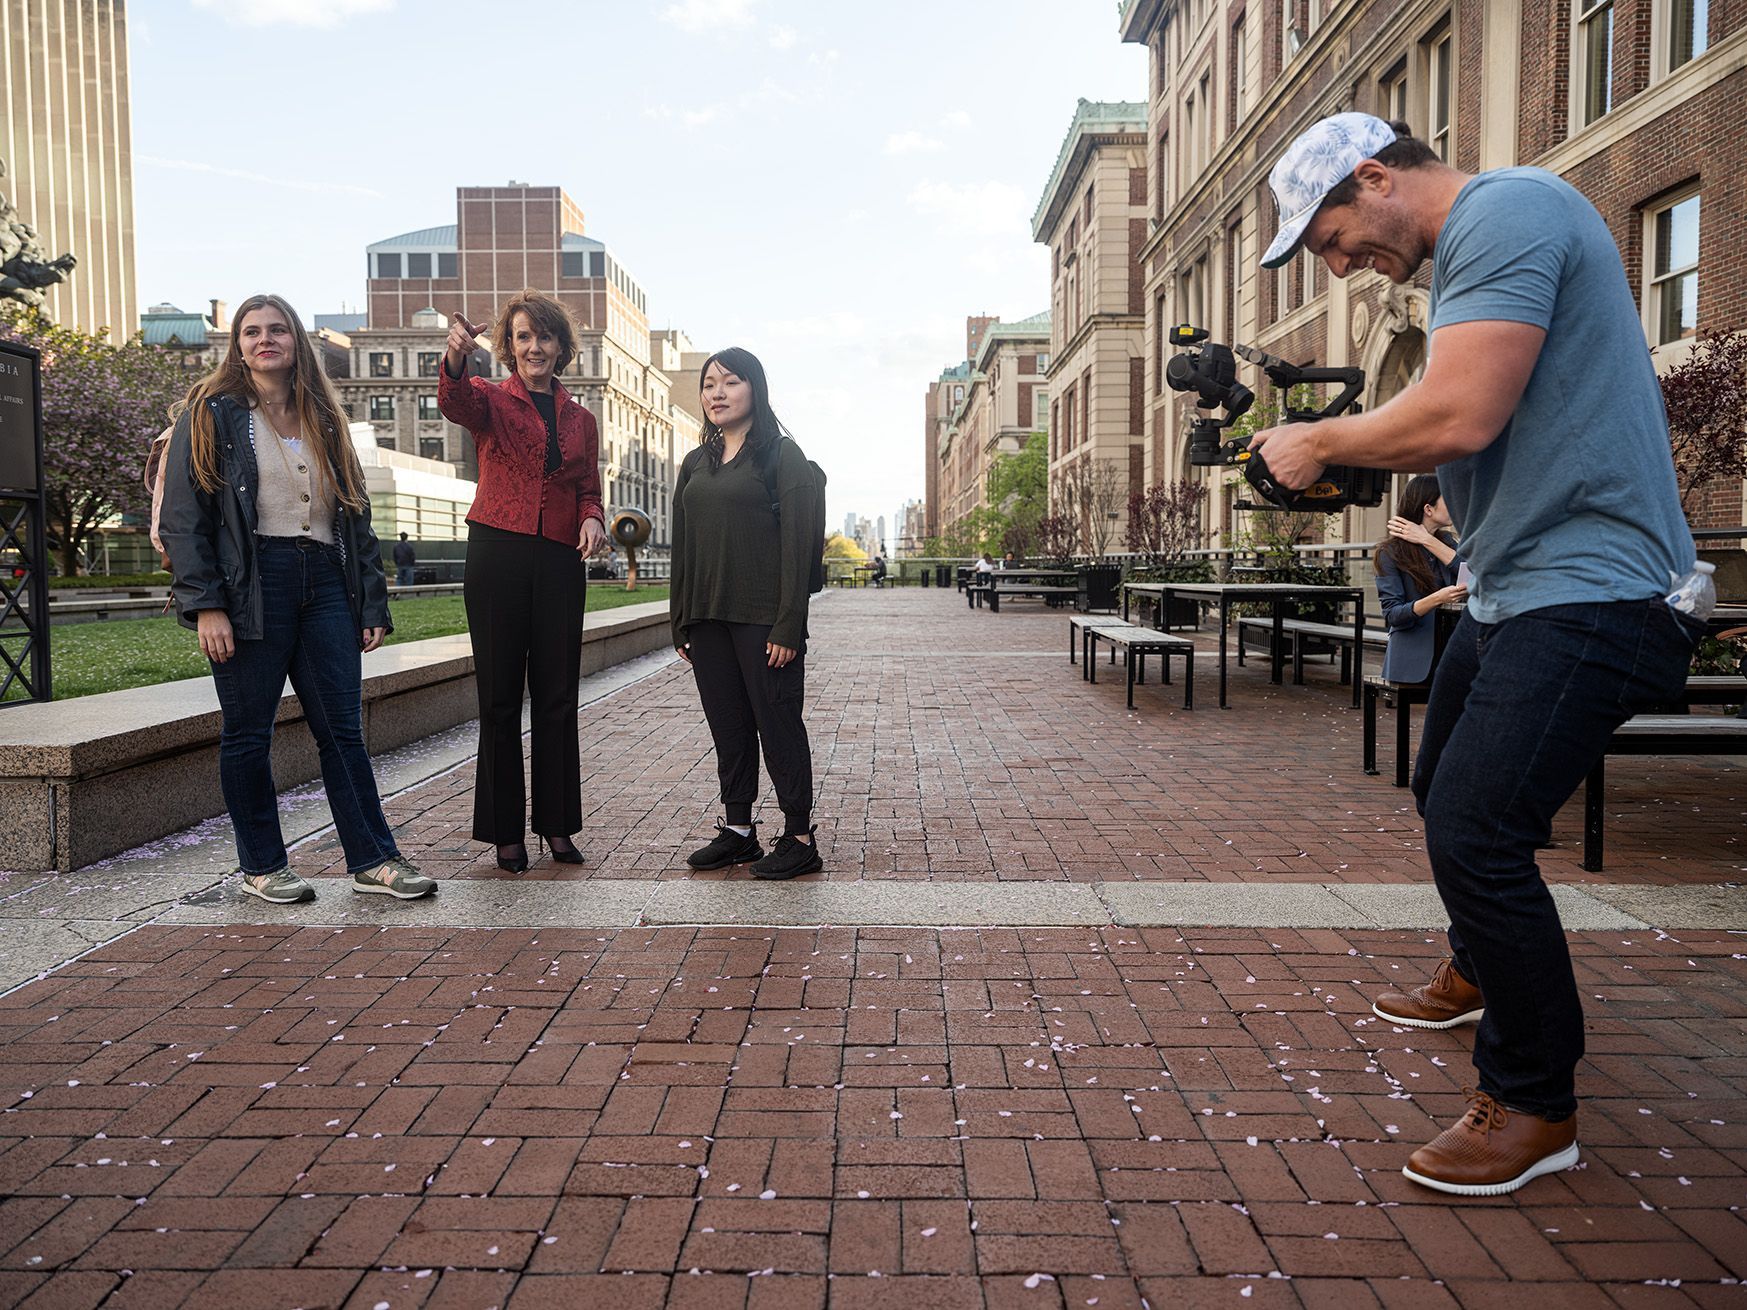 Shane Yeager CEO CineSalon films Sarah Cleveland at Columbia University with A DJI Ronin 4D